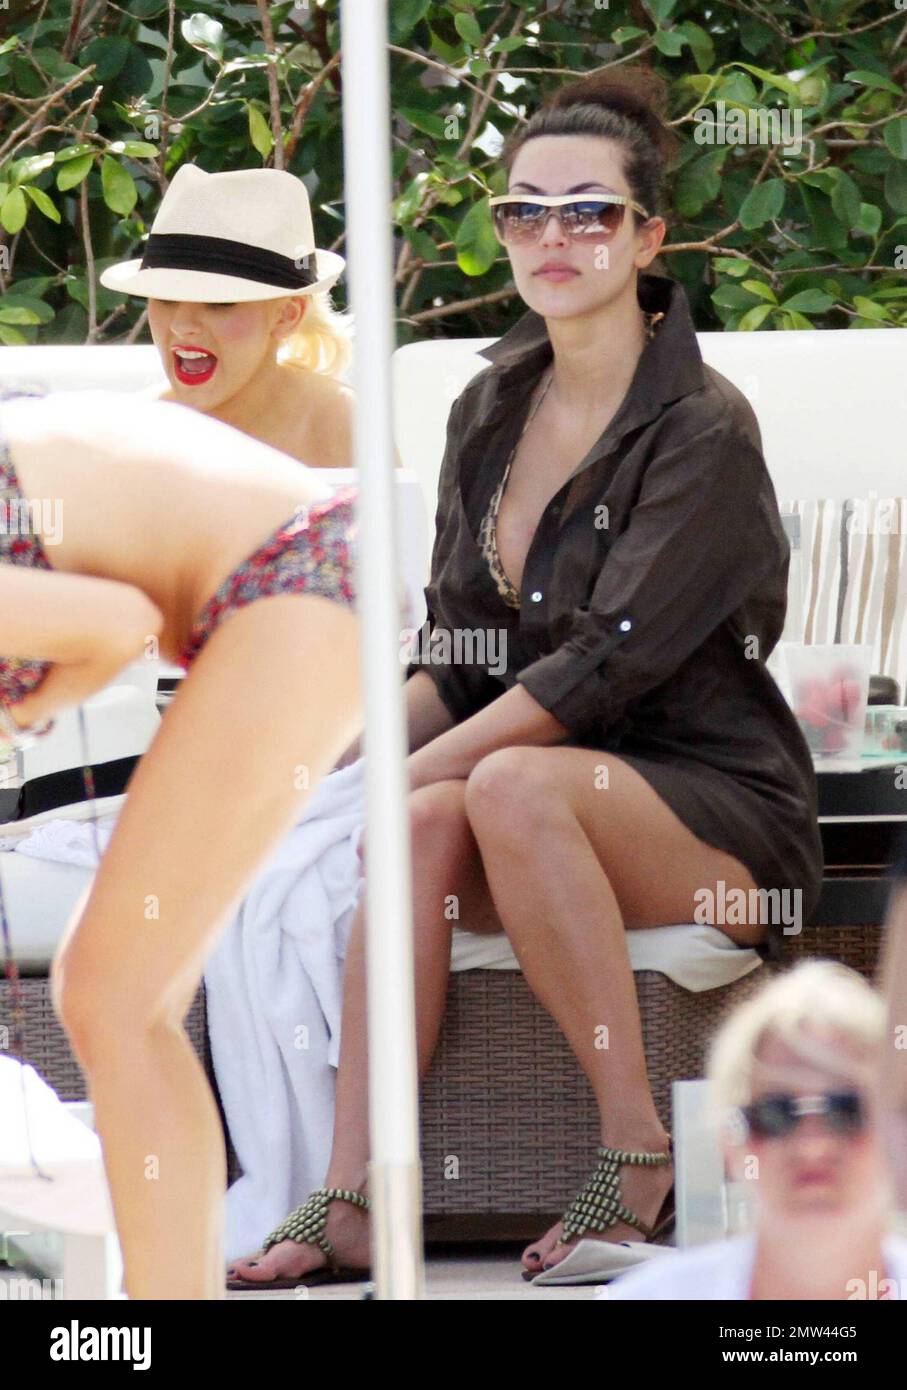 Christina Aguilera joins good pal Simone Harouche poolside at the  Fontainebleau Miami Beach for her bachelorette party. Also on hand to join  in the fun was bikini clad Kim Kardashian. The singer